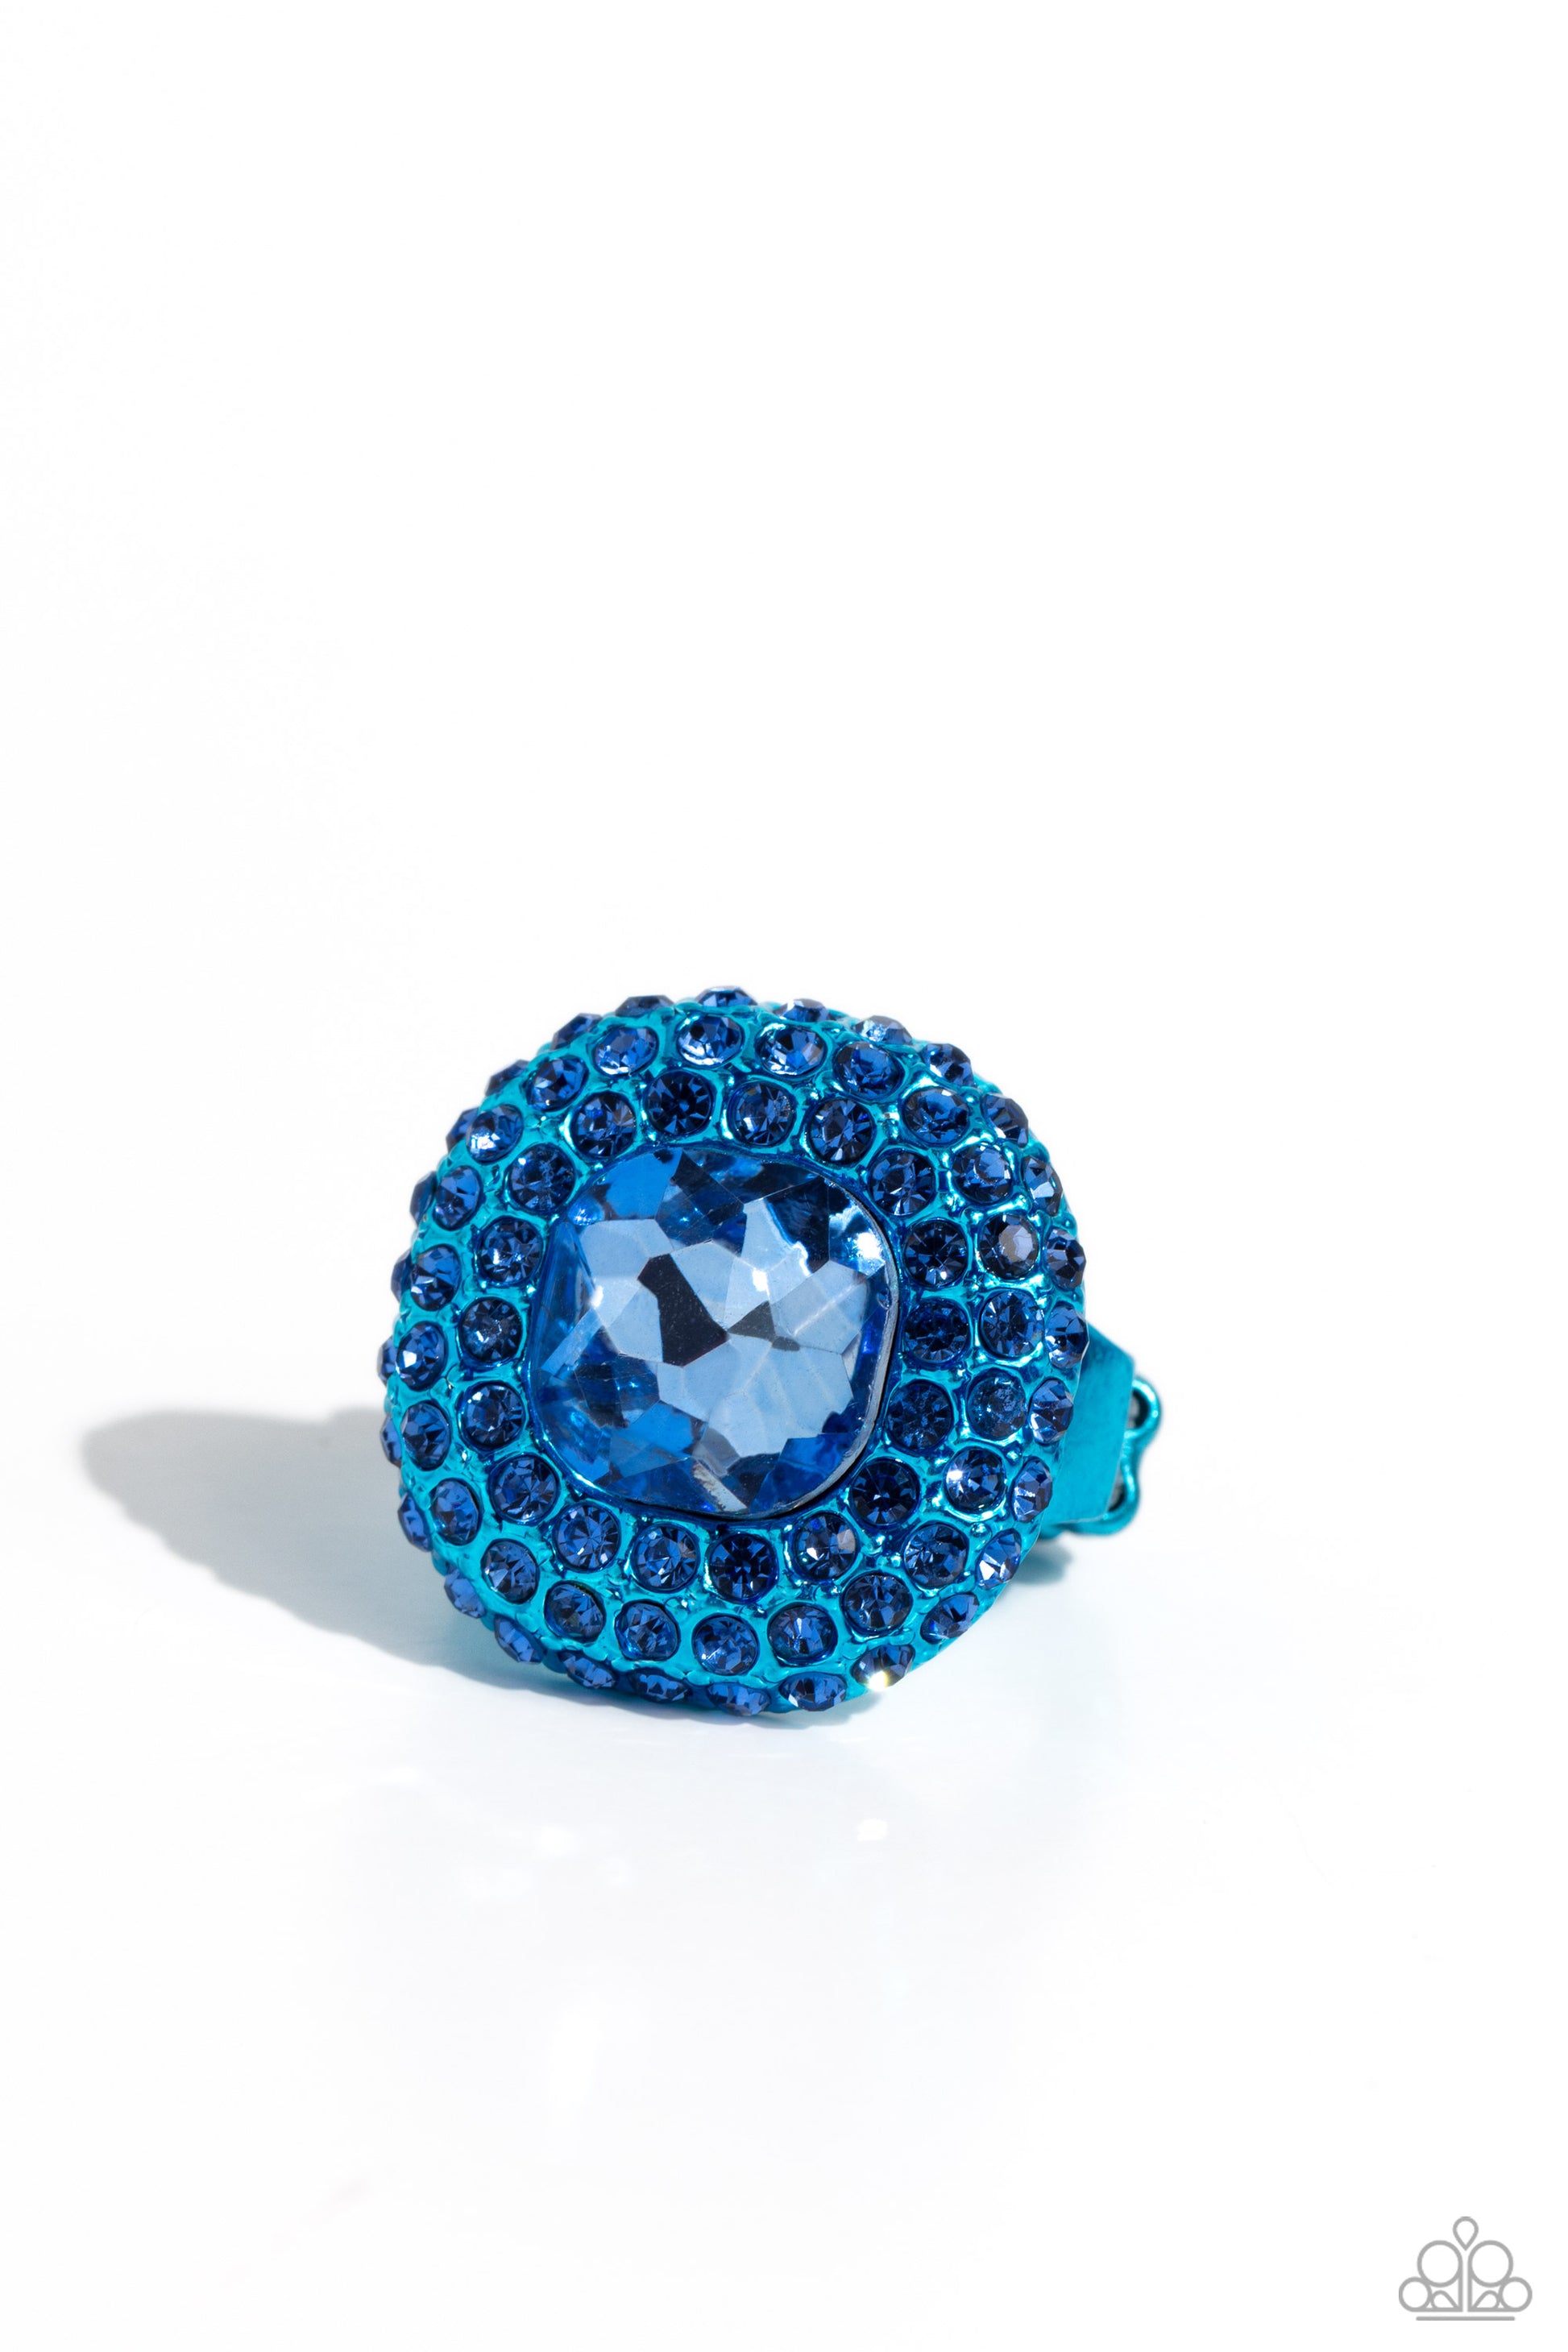 Glistening Grit Blue Ring - Paparazzi Accessories  Featuring a regal square cut, an oversized Persian Jewel gem nestles inside a rounded square blue metallic frame encrusted in glassy blue rhinestones for a dramatically glamorous look. Features a dainty stretchy band for a flexible fit.  Sold as one individual ring.  P4ST-BLXX-025XX